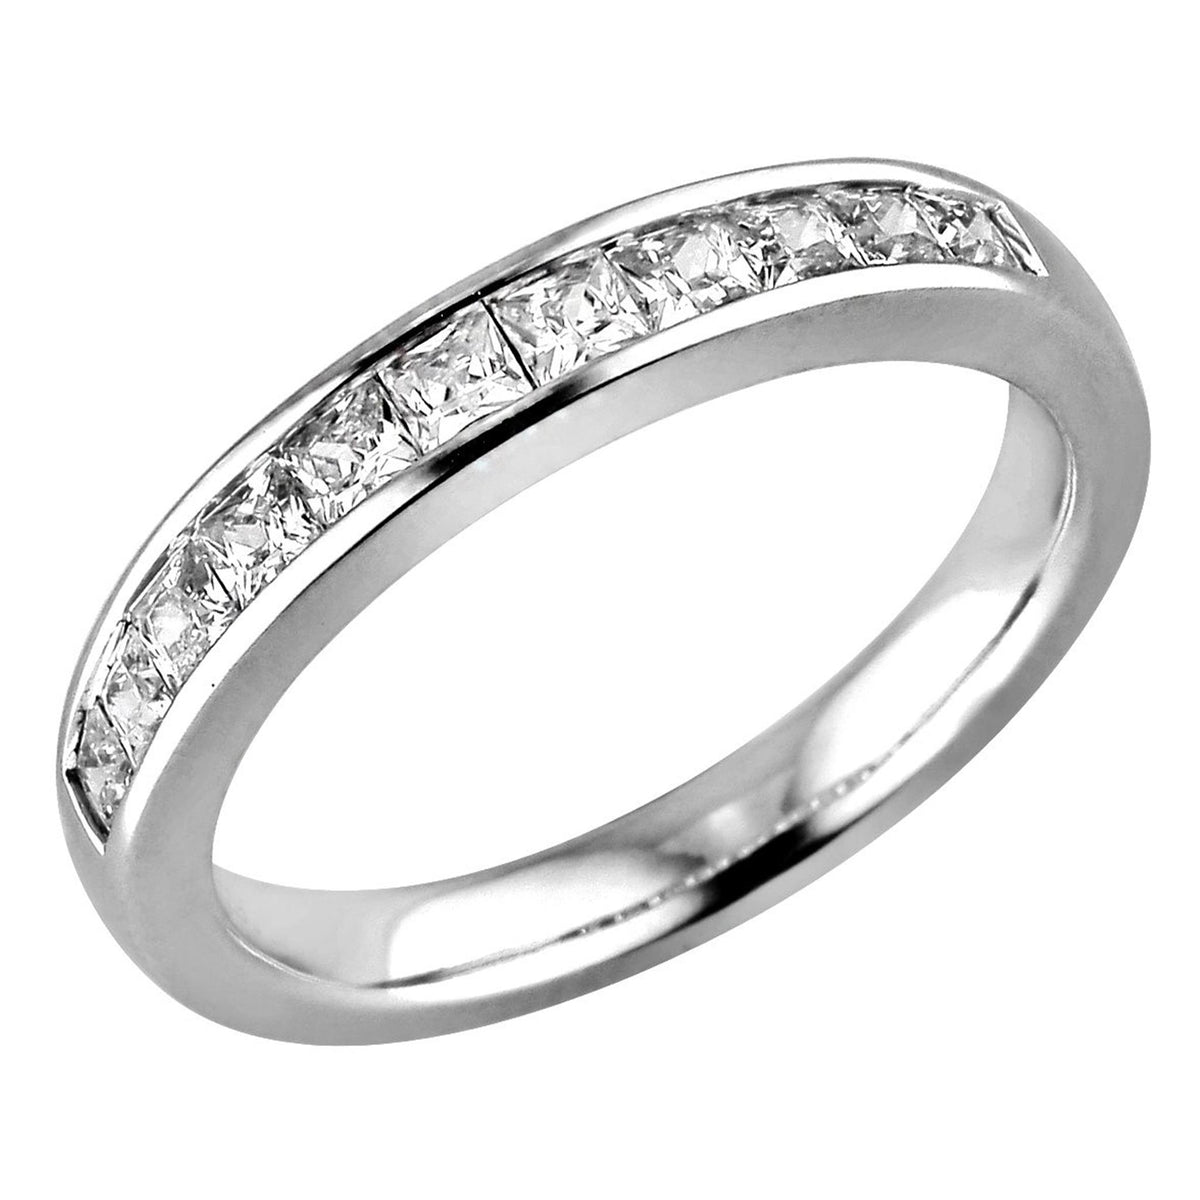 18Kt White Gold Channel Set Wedding Ring With 0.75cttw Natural Diamonds